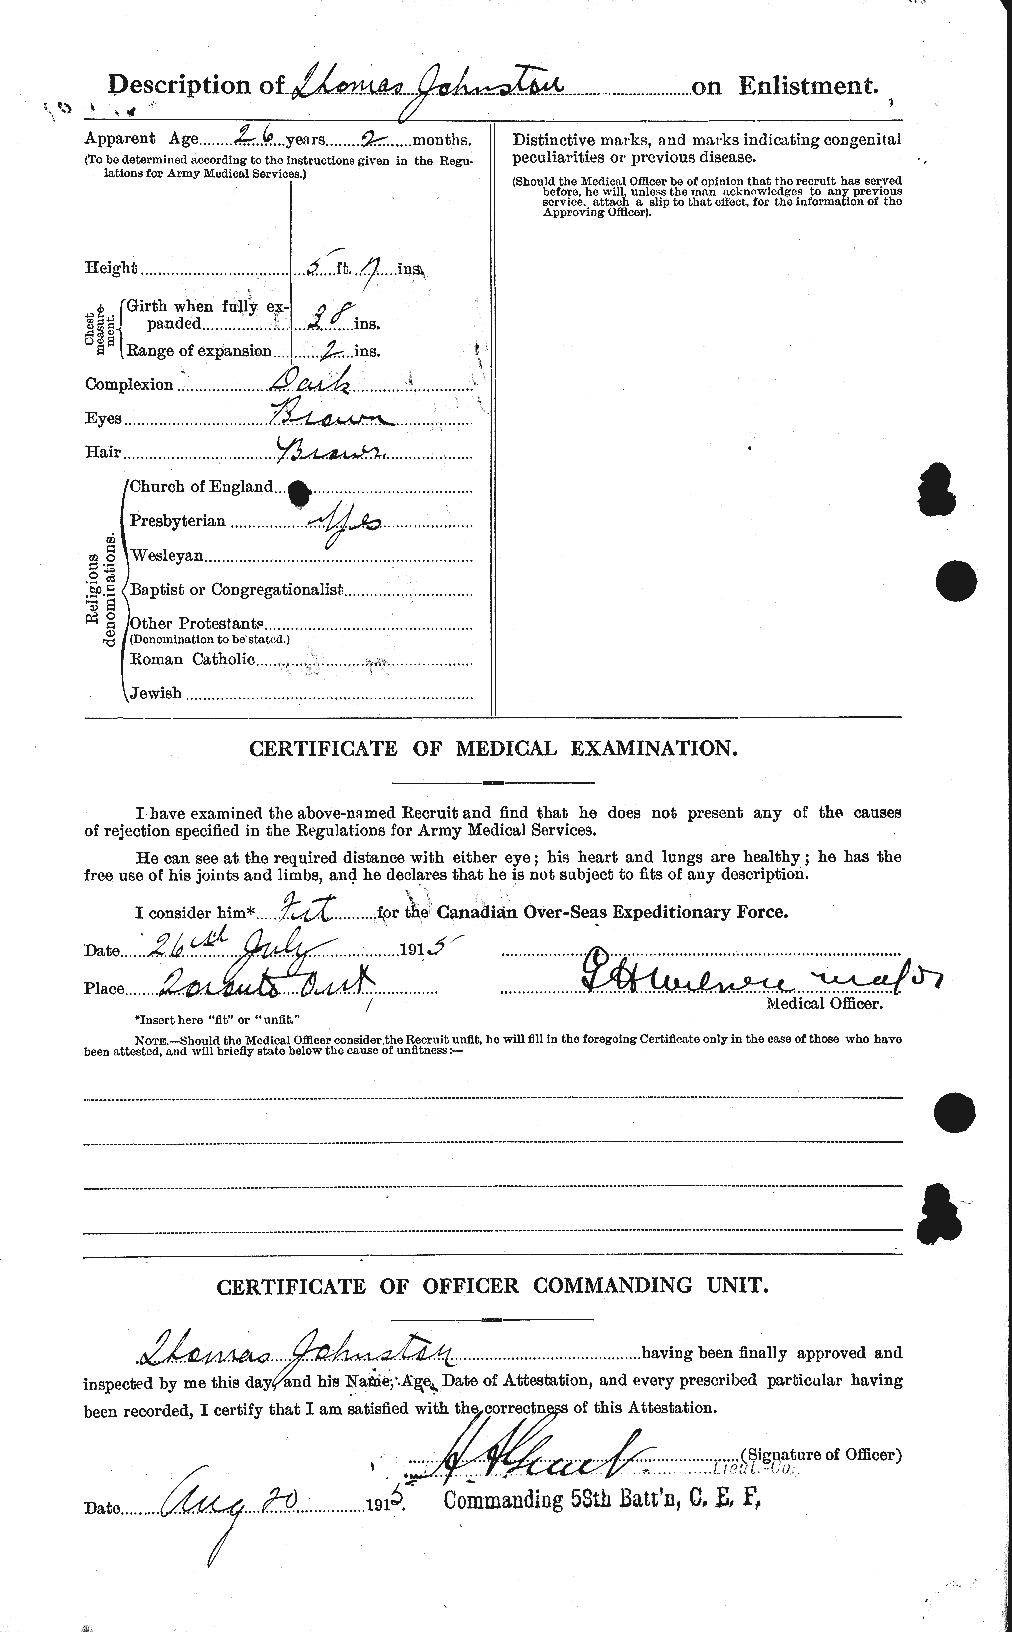 Personnel Records of the First World War - CEF 427129b